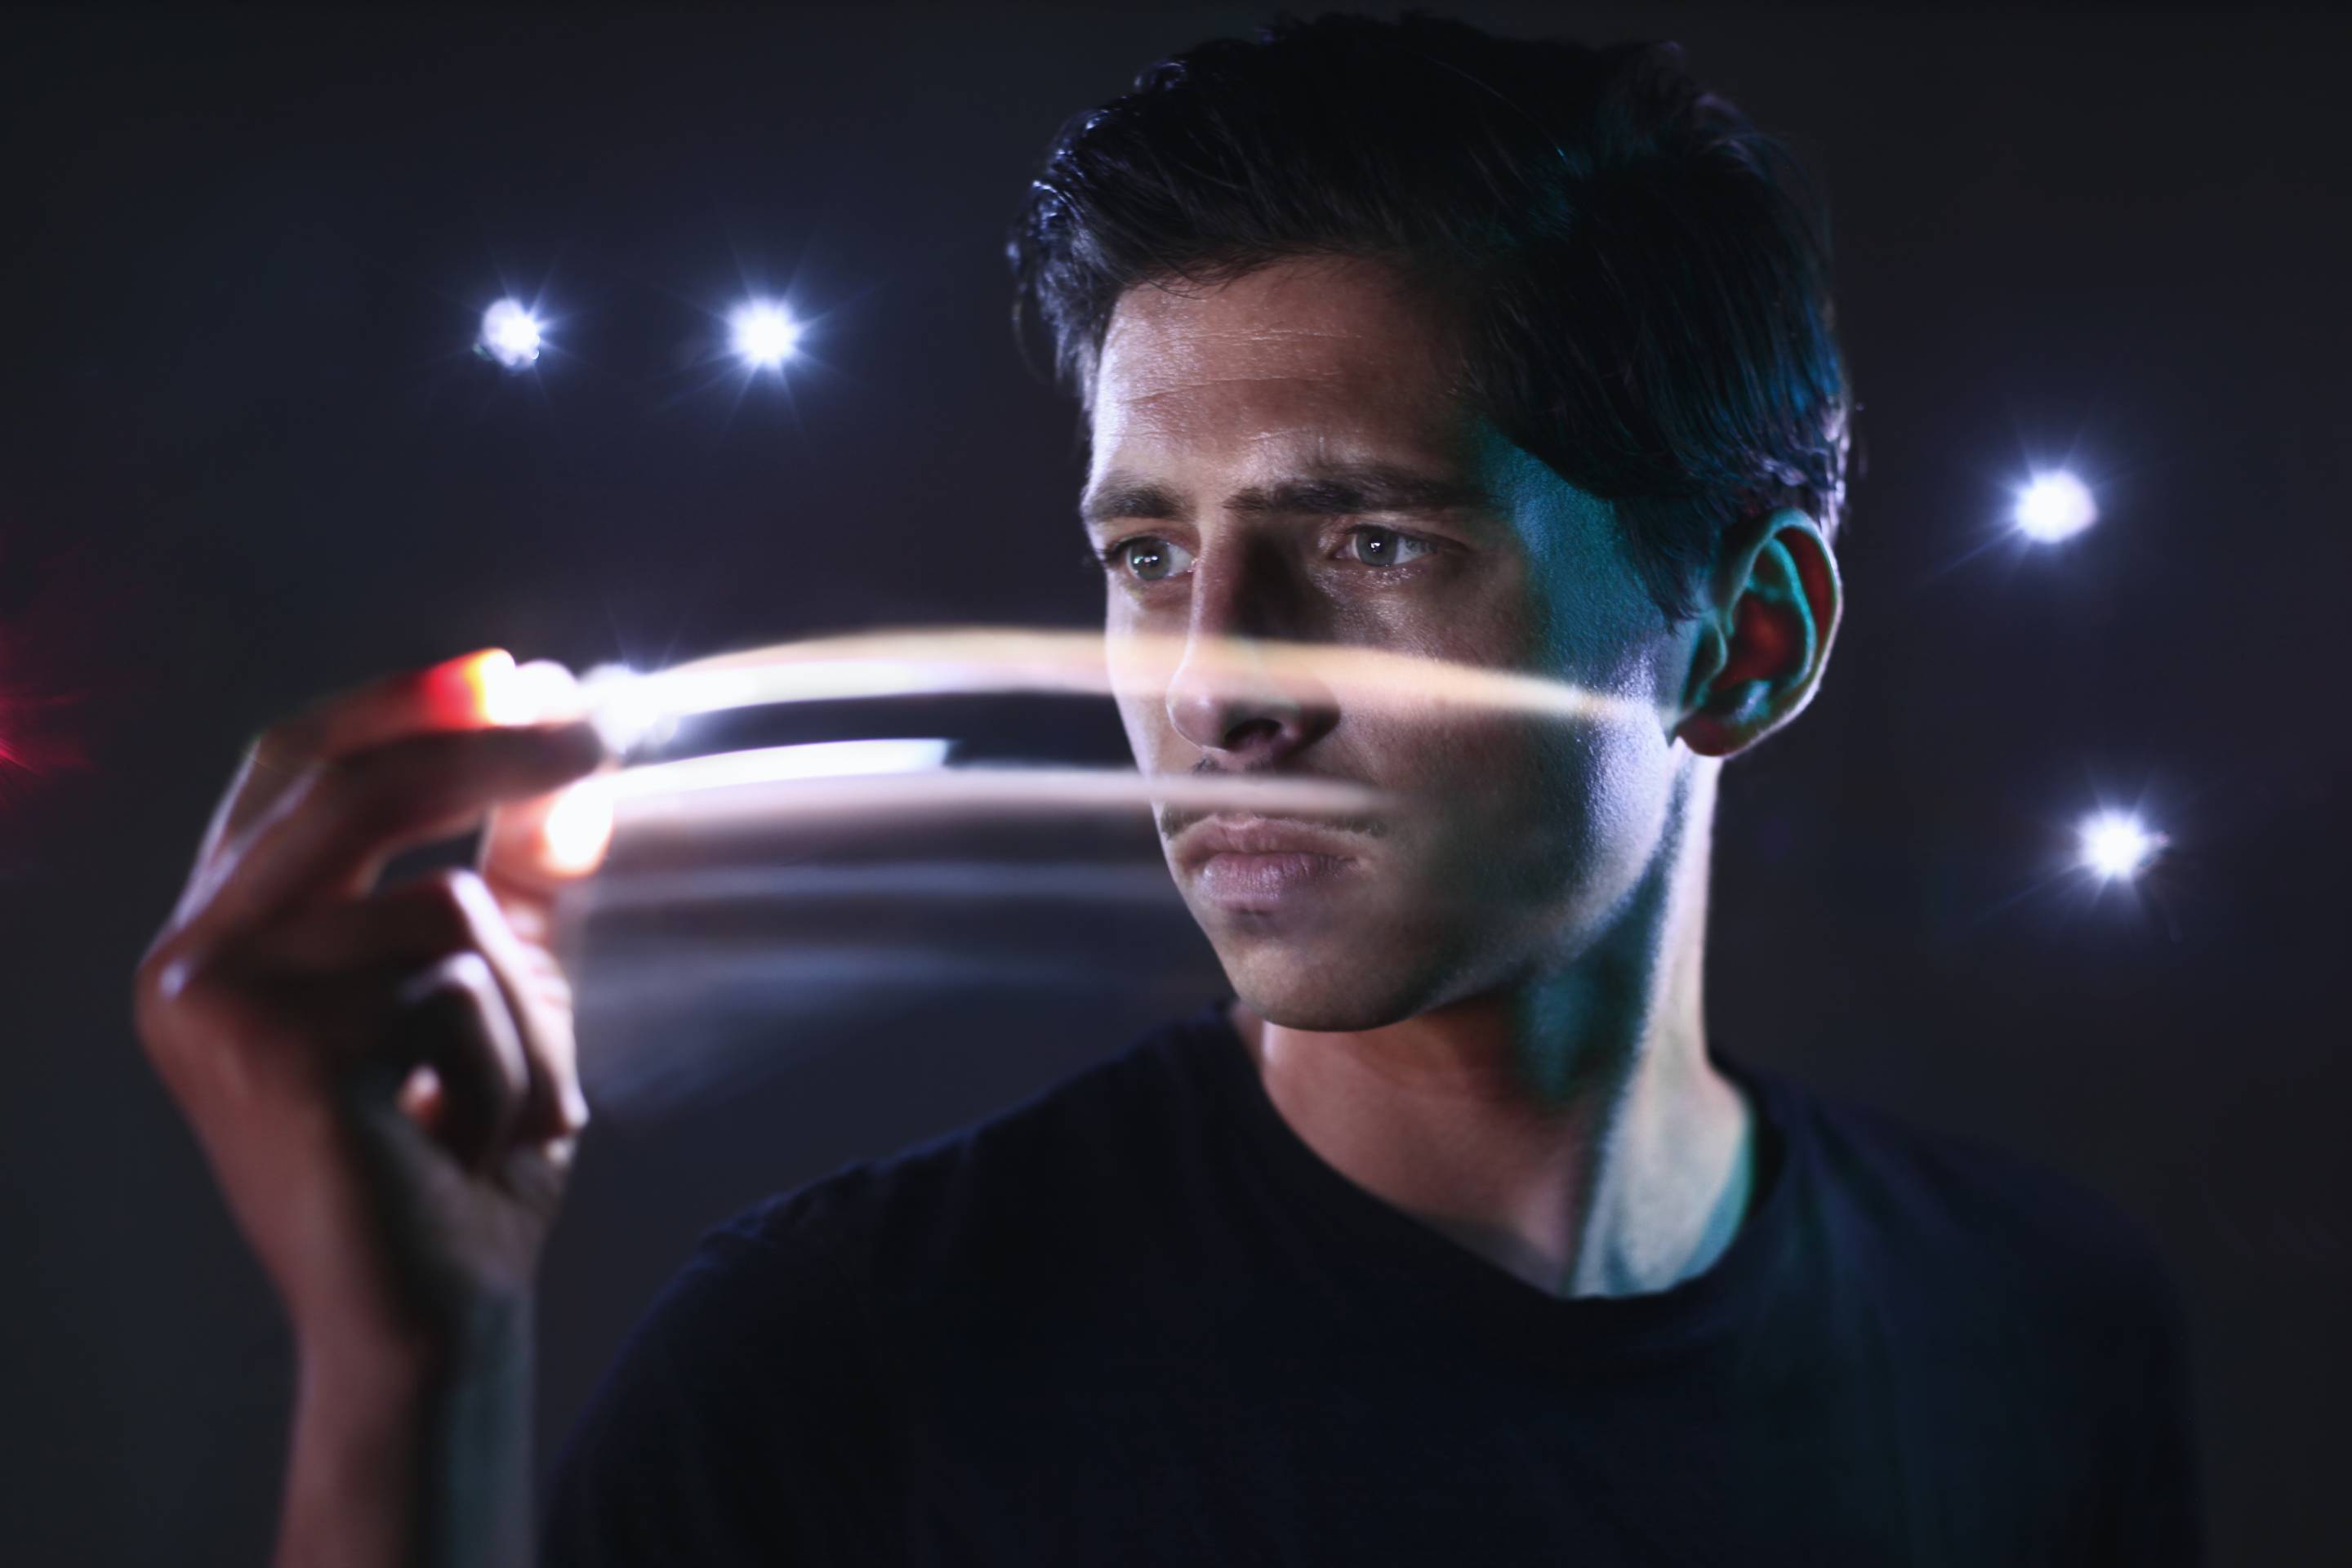 Portrait of man moving lights in his hand